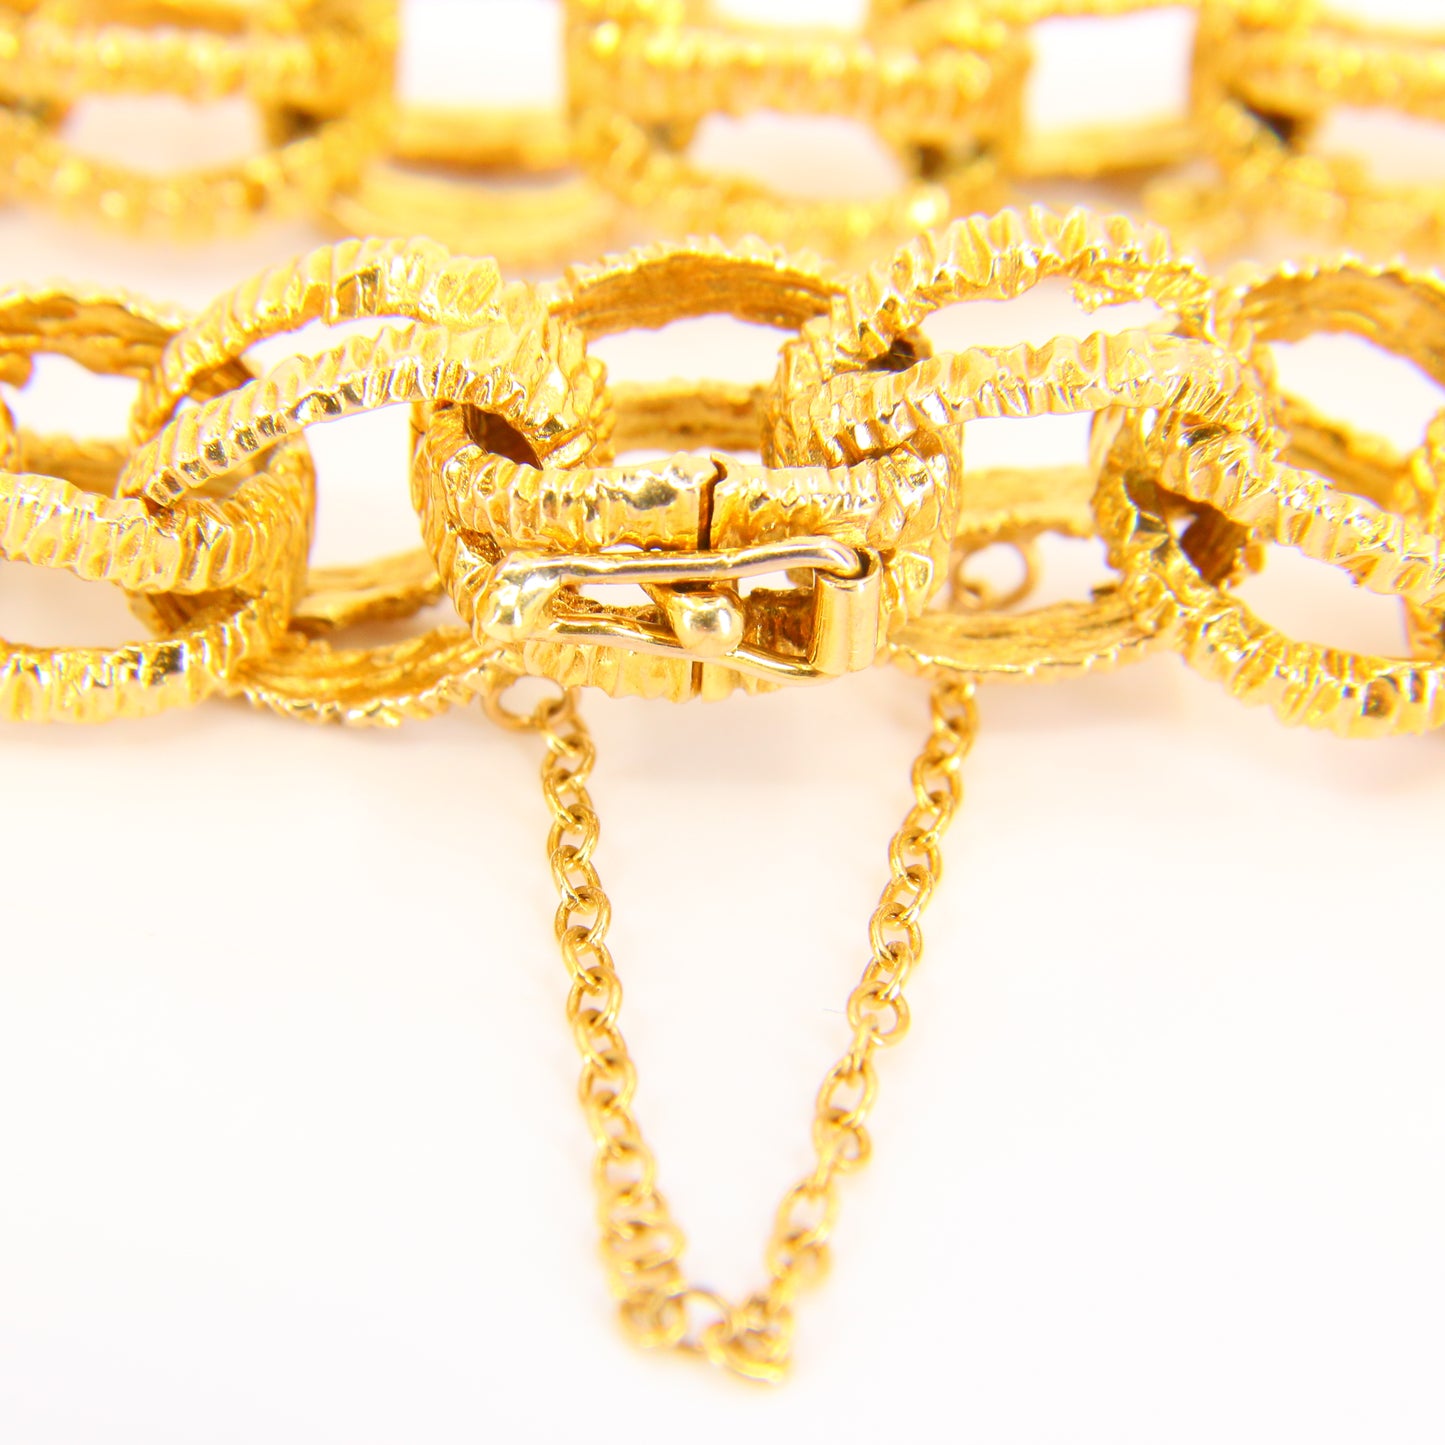 Vintage 1970s London 9ct Chain Link Bracelet Textured Yellow Gold Hallmarked Boxed